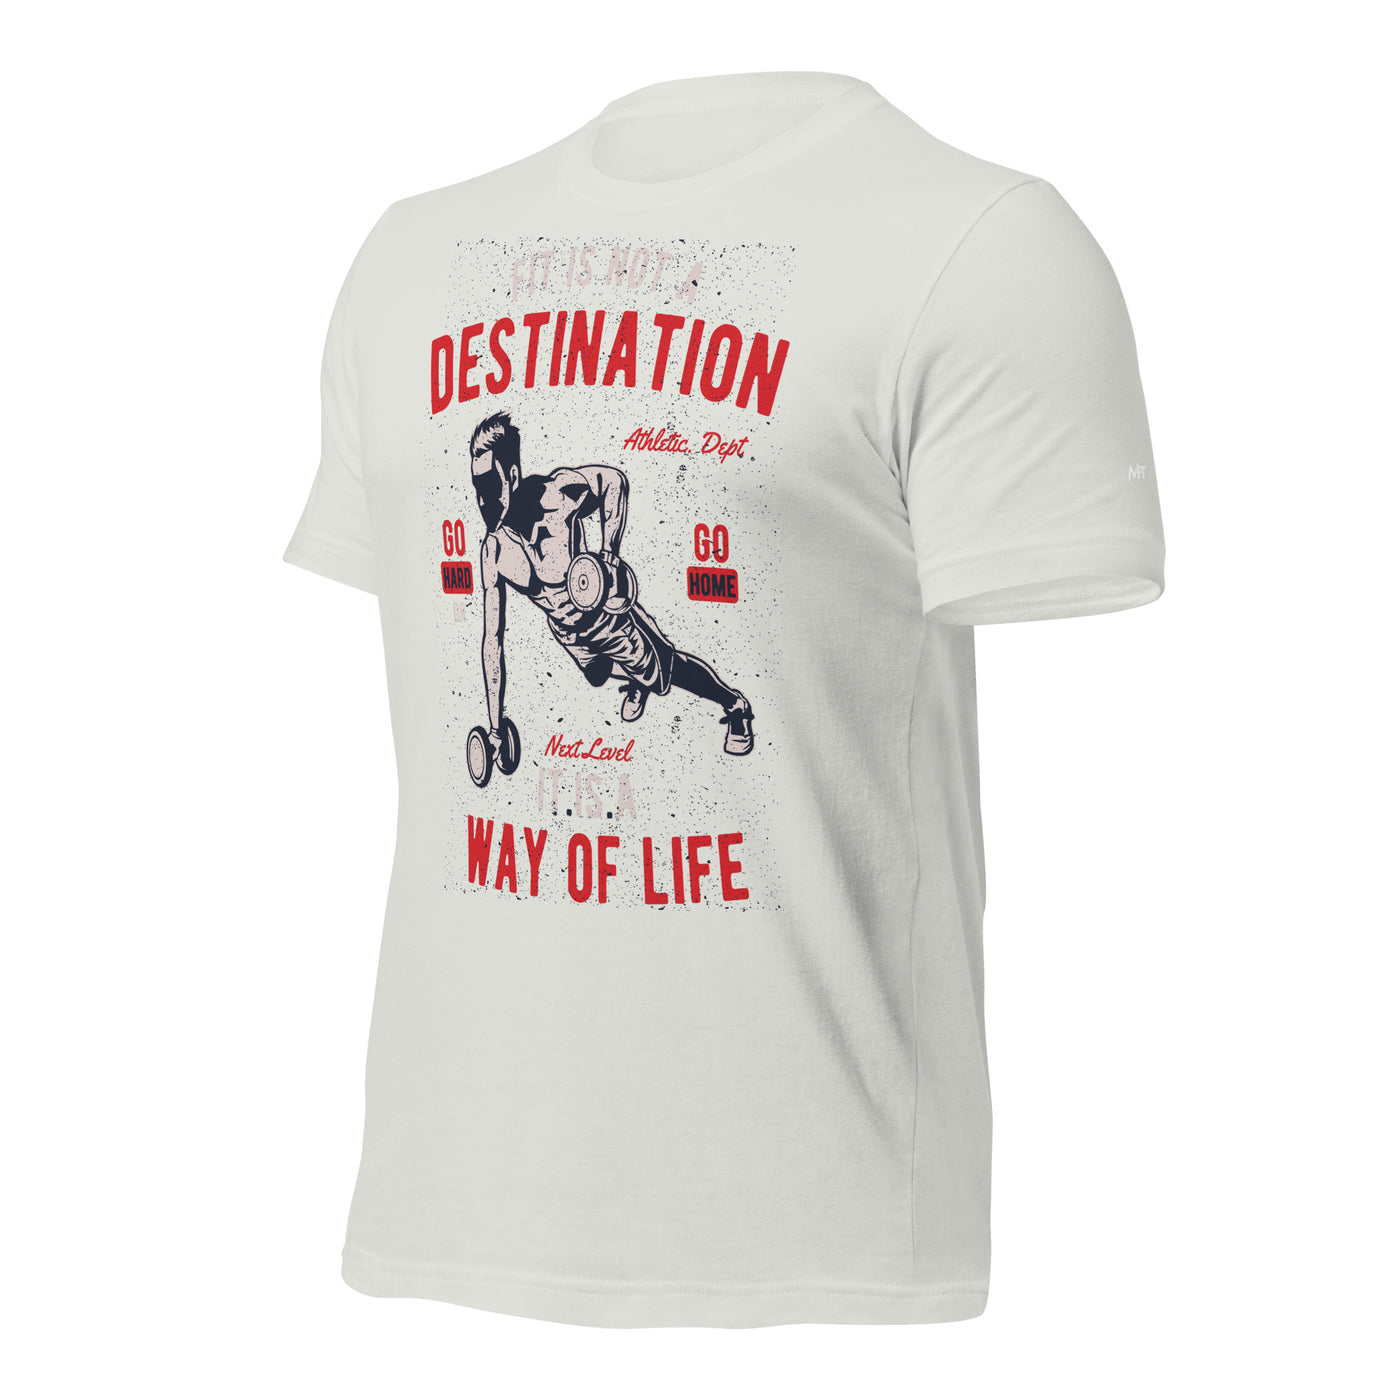 Fit is not a destination: it is a way of life - Unisex t-shirt